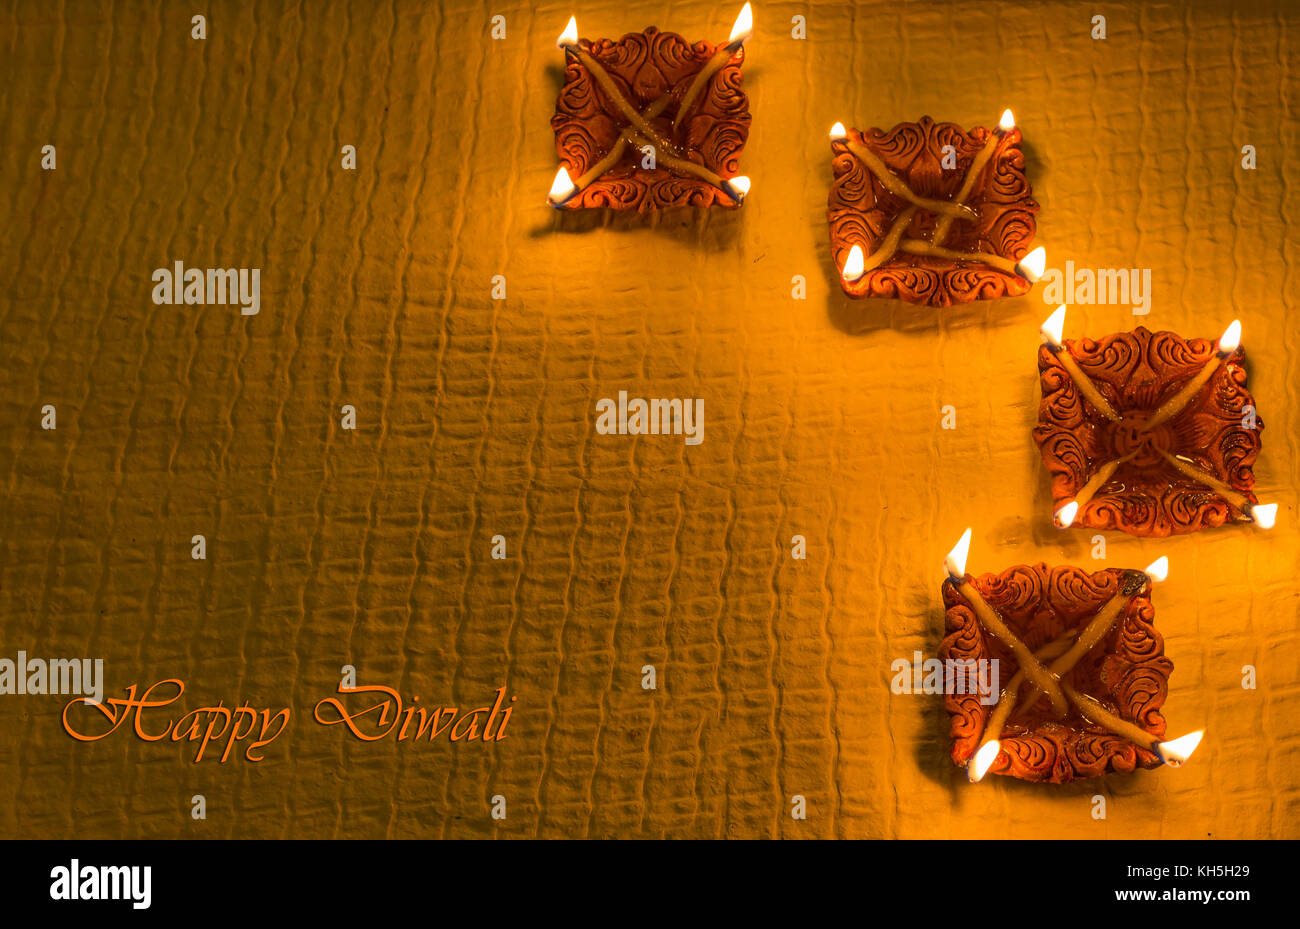 Diwali colorful decorative clay diya lamps for background greetings content Stock Photo